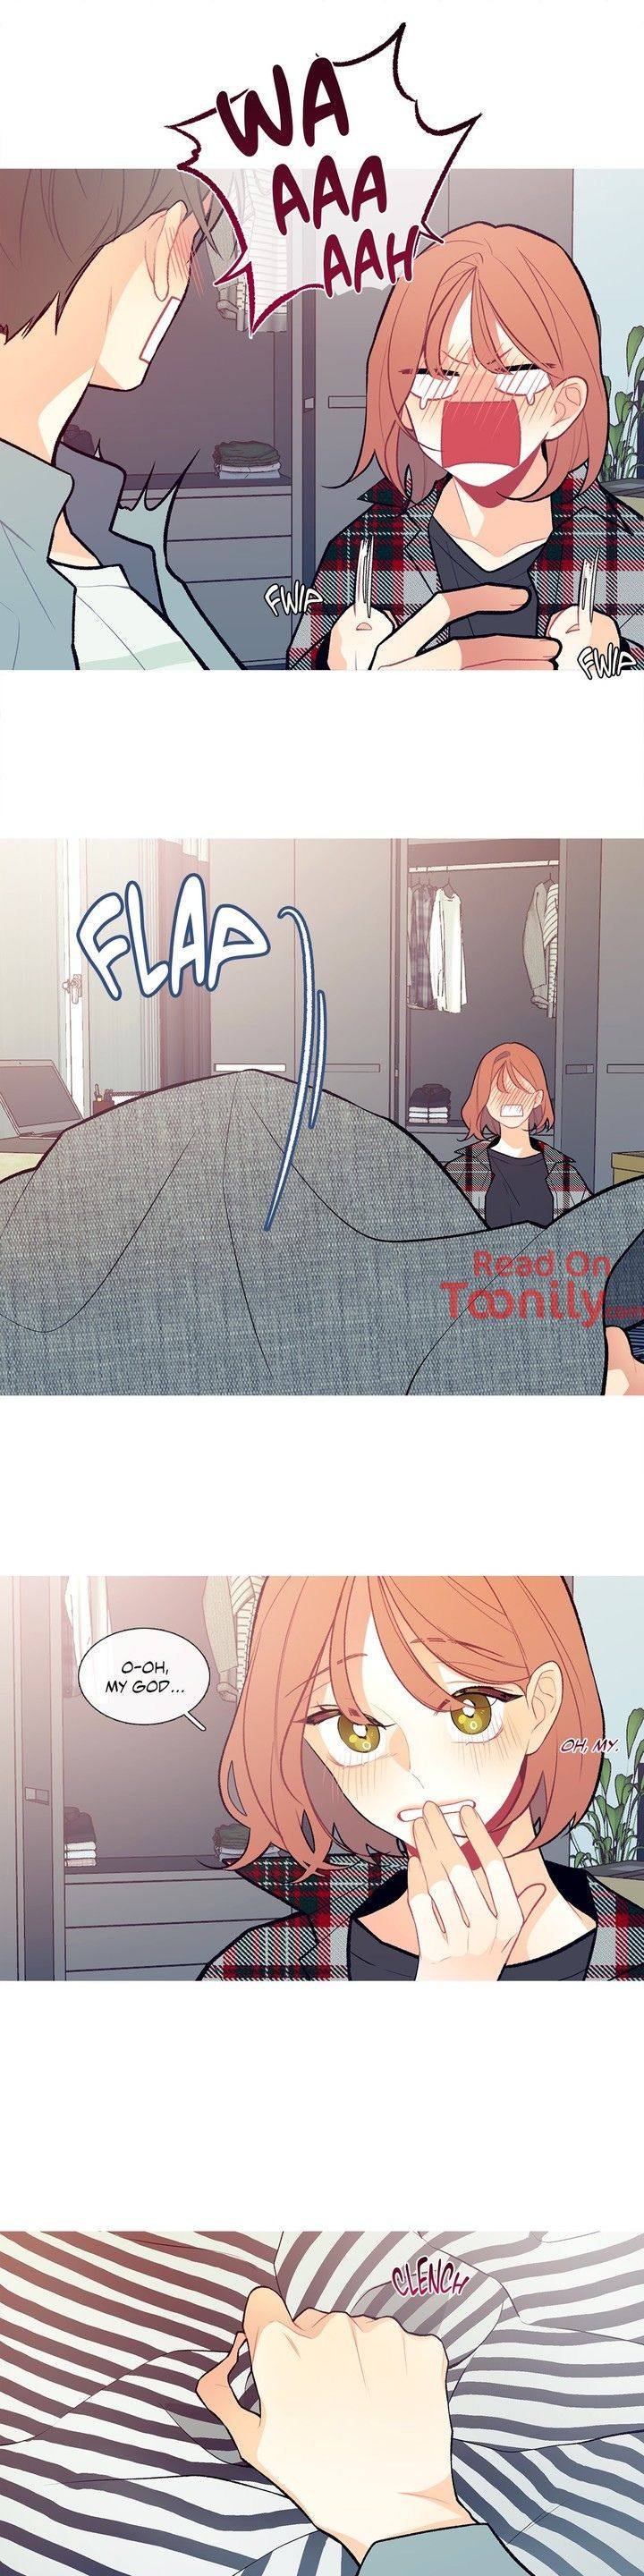 whats-going-on-chap-3-6